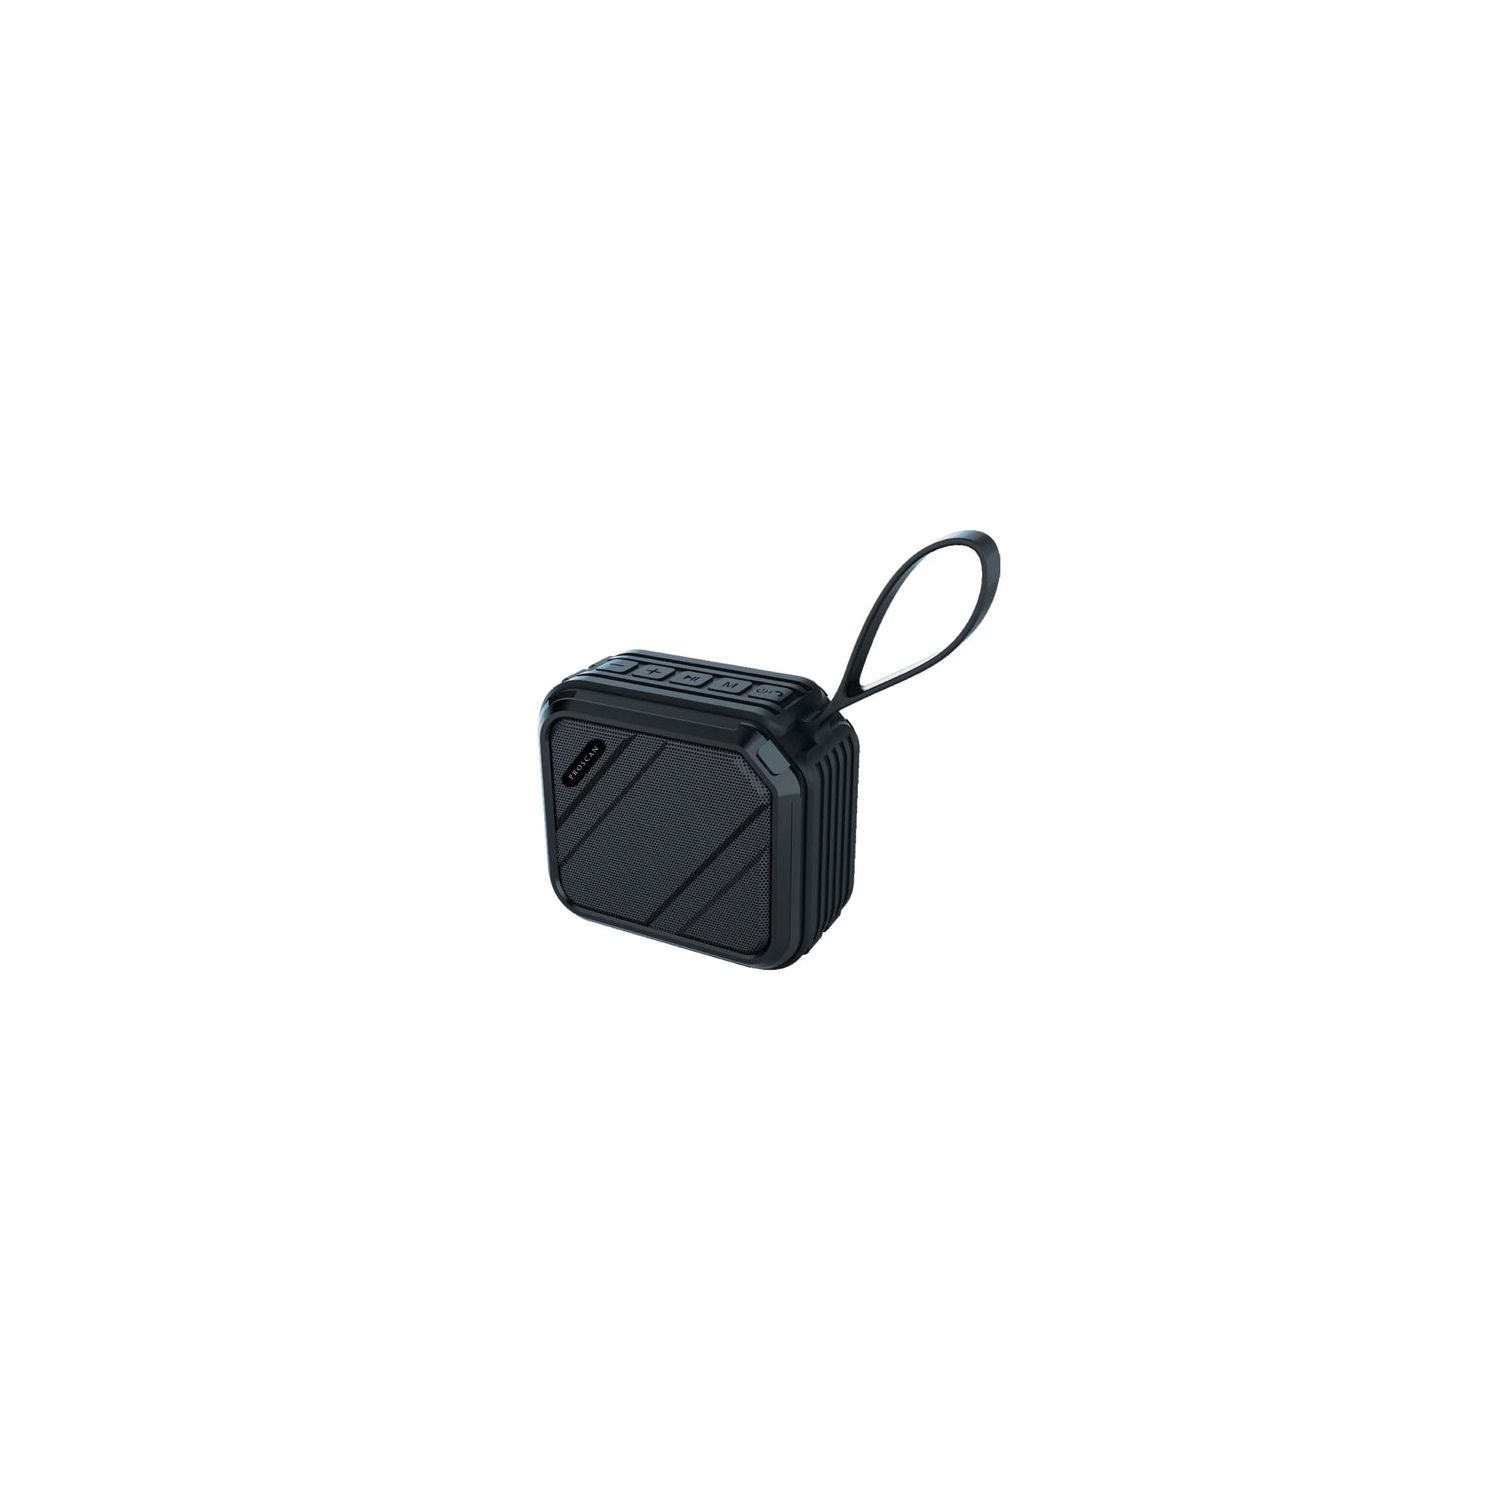 Proscan Extreme Portable Wireless Water-Resistant Bluetooth Speaker With Fm Radio & Aux - Black